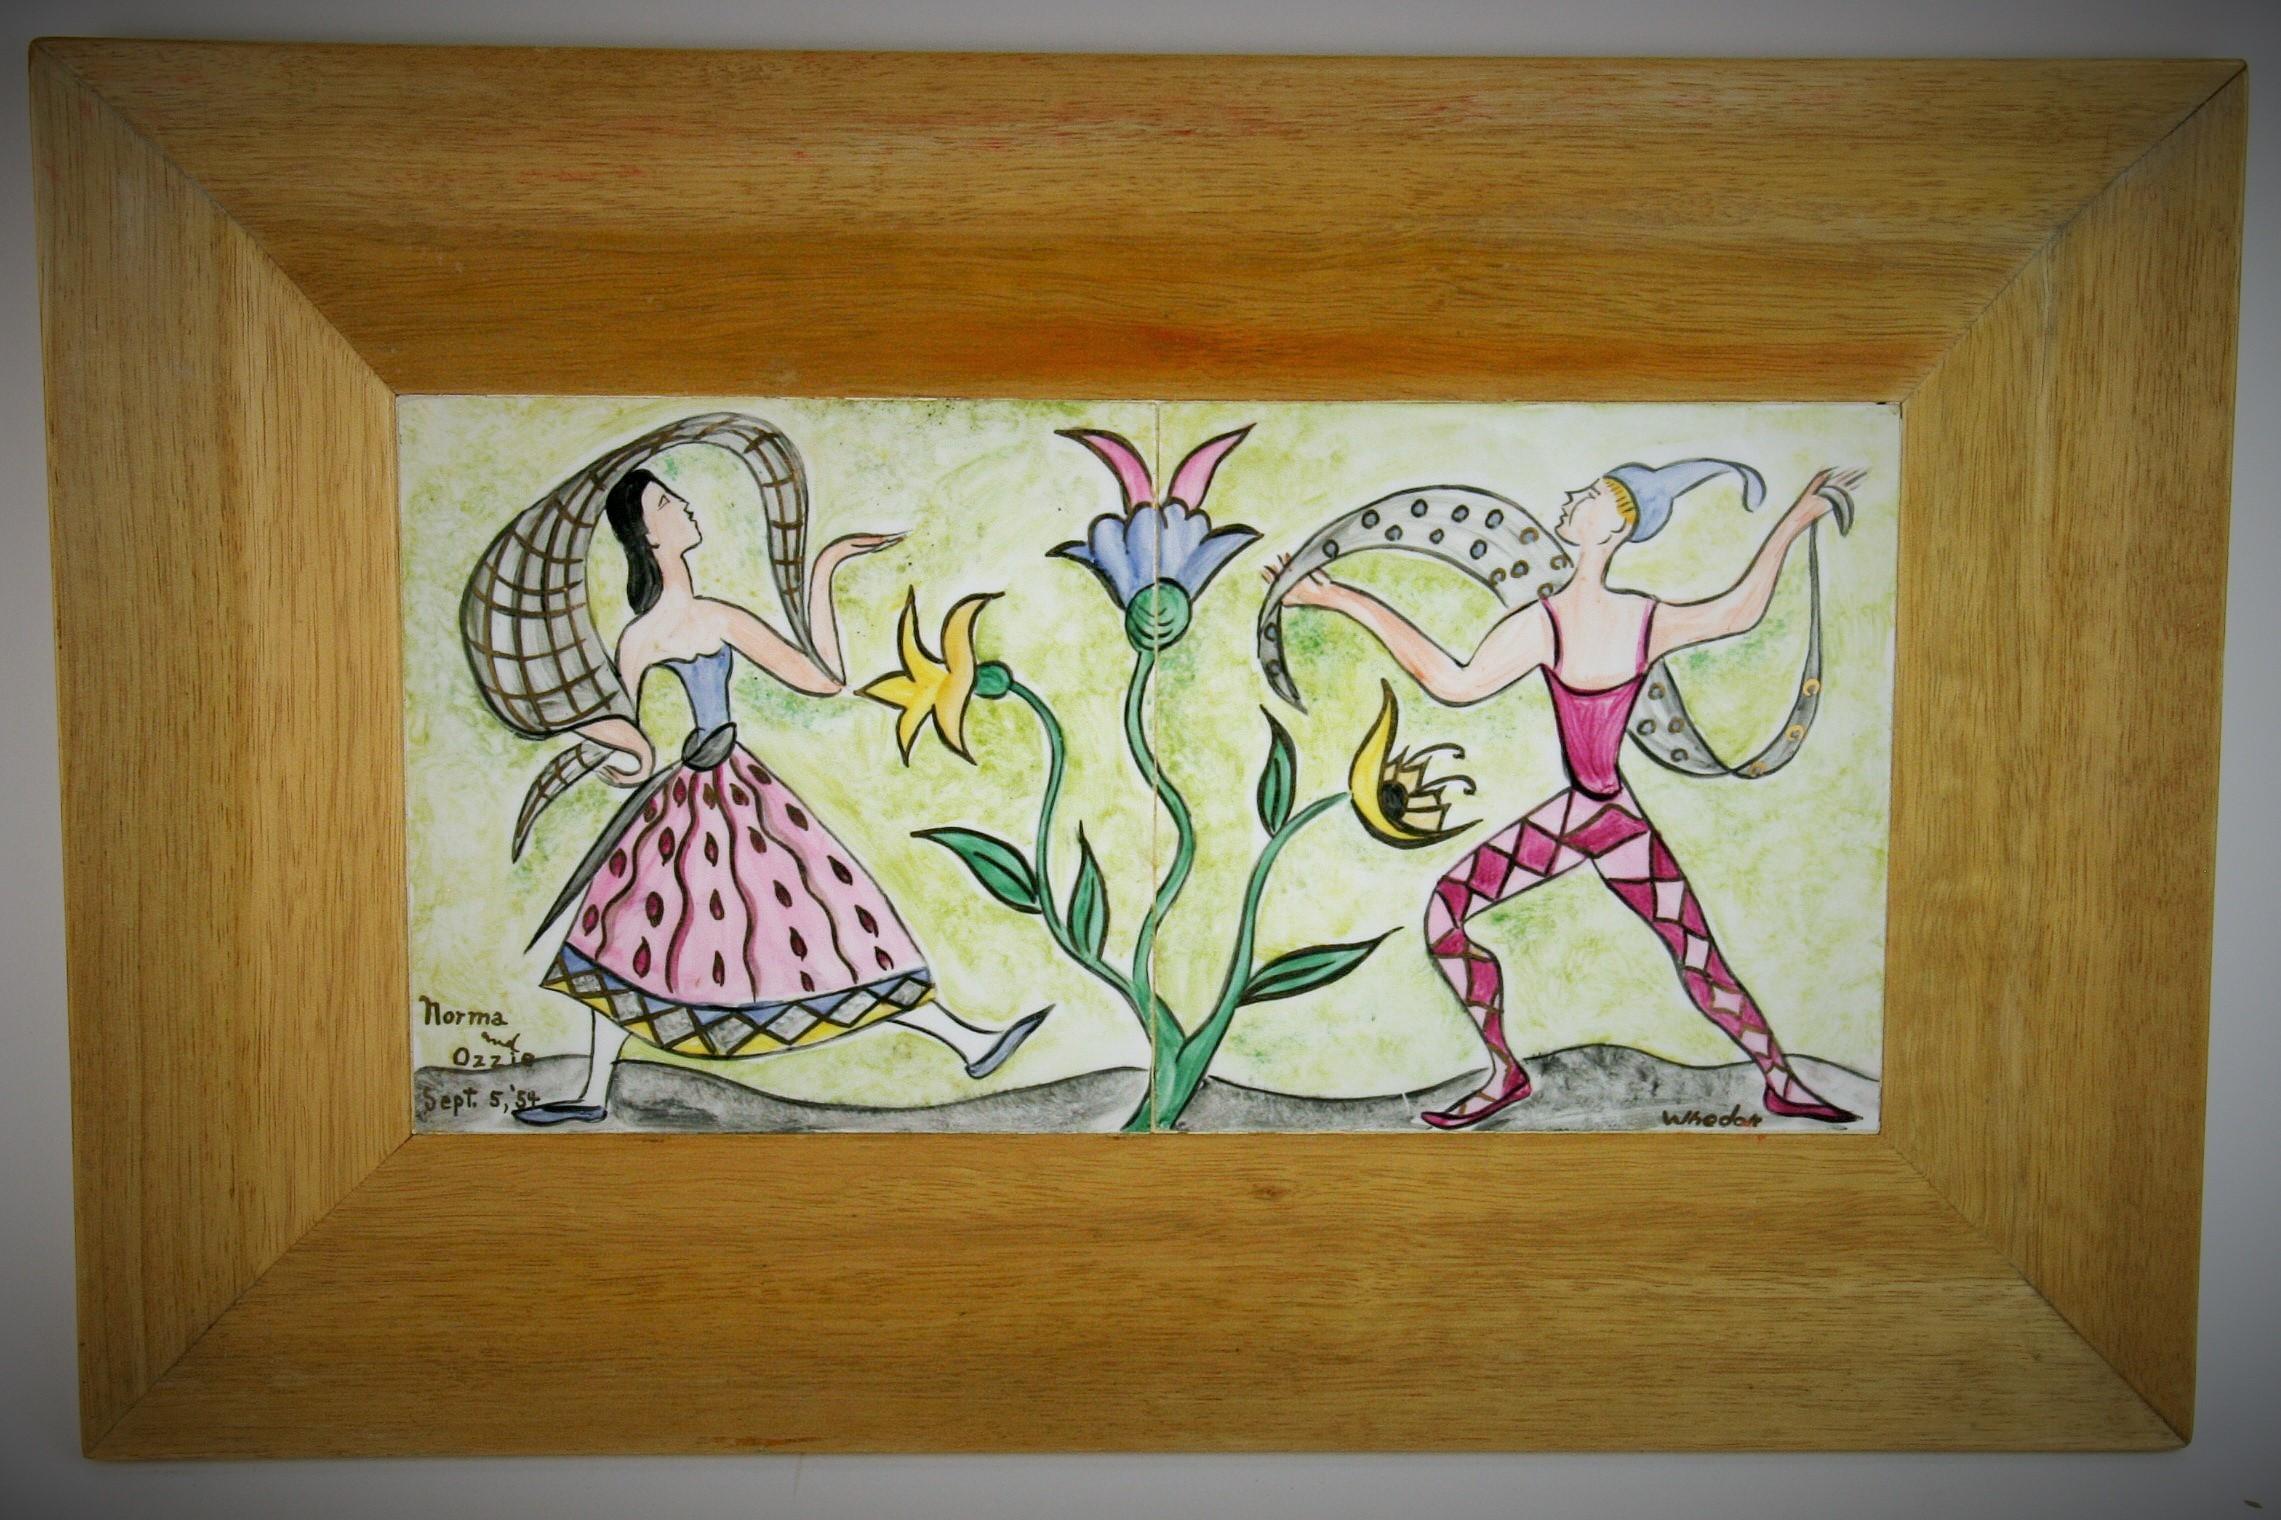 3-400 two hand painted Folk Art ceramic panels set in a natural wood frame.
Image size: 12.5 x 6